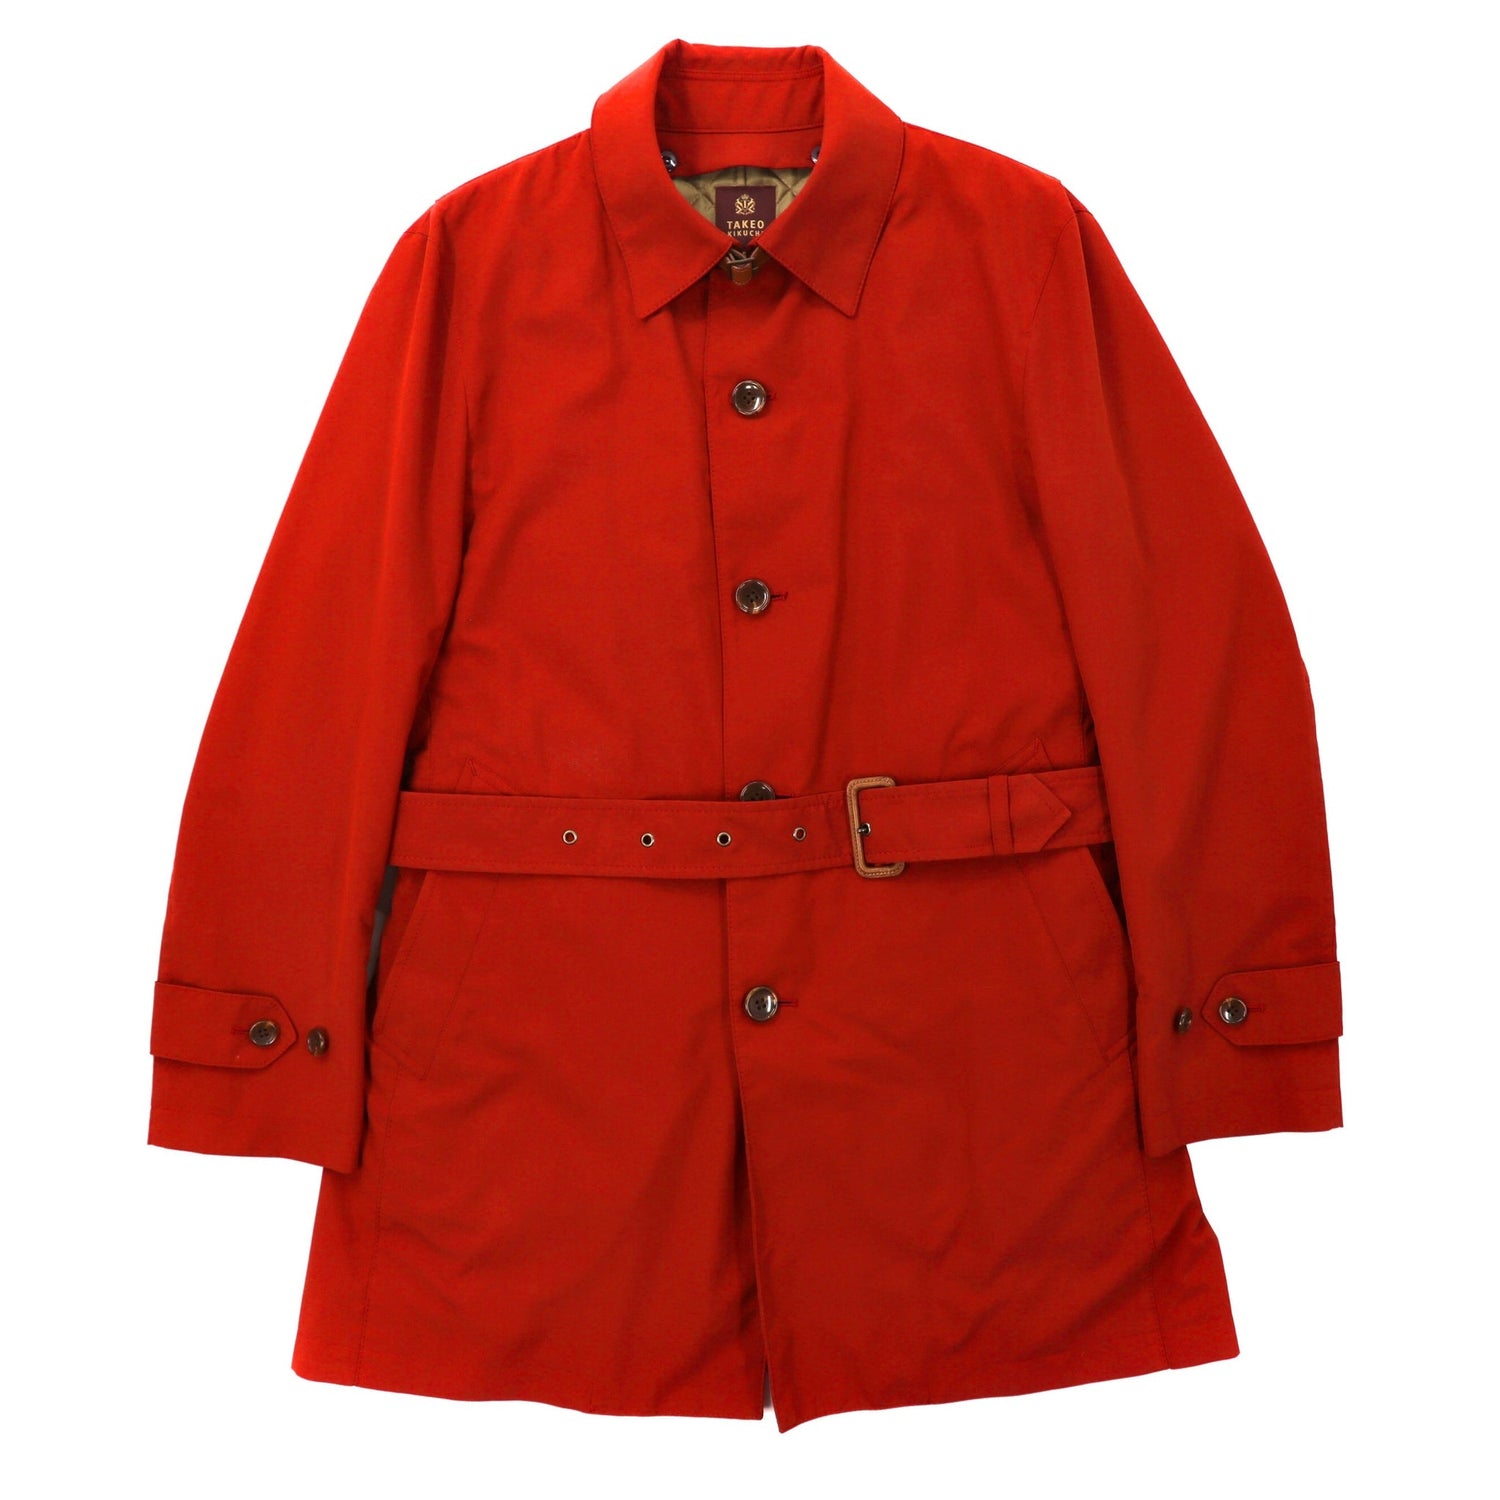 TAKEO KIKUCHI COAT 1 Red polyester quilting liner detached type